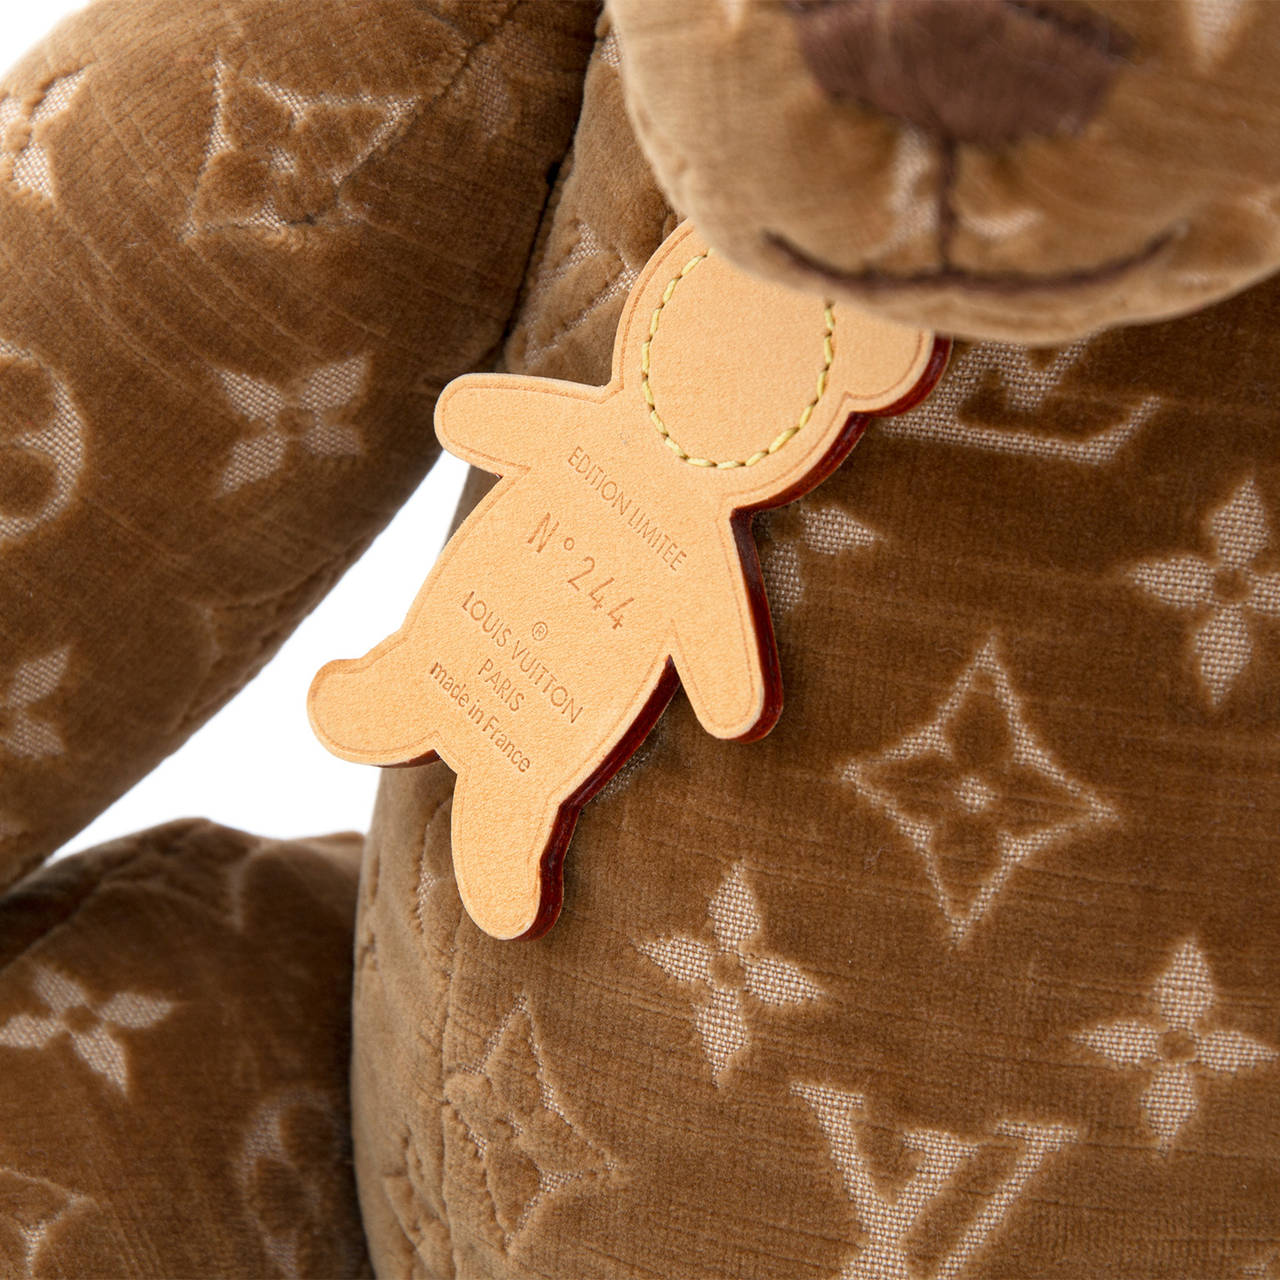 Exceptional Louis Vuitton DouDou teddy bear in soft beige and